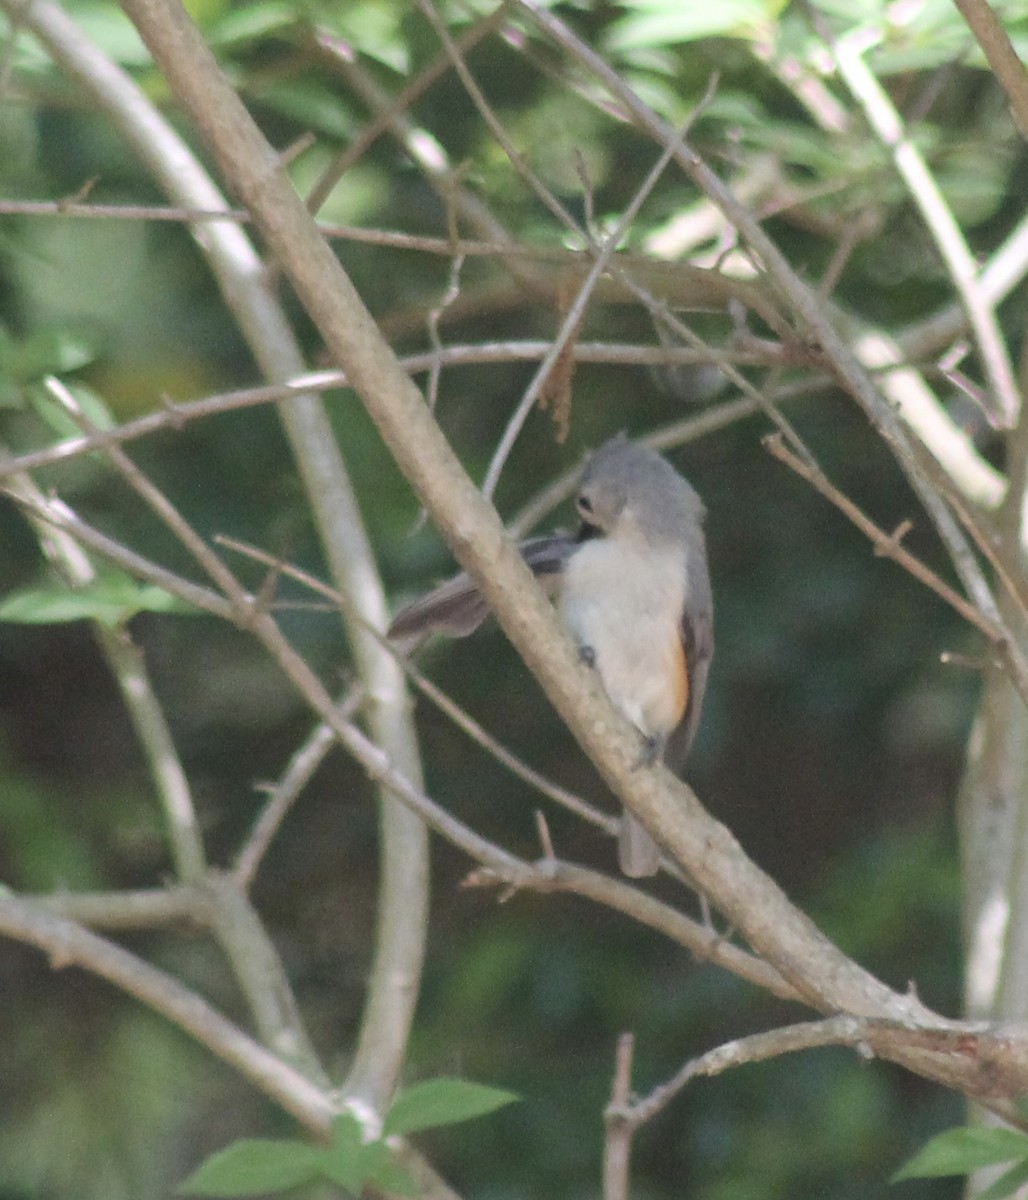 Tufted Titmouse - Mike Grose